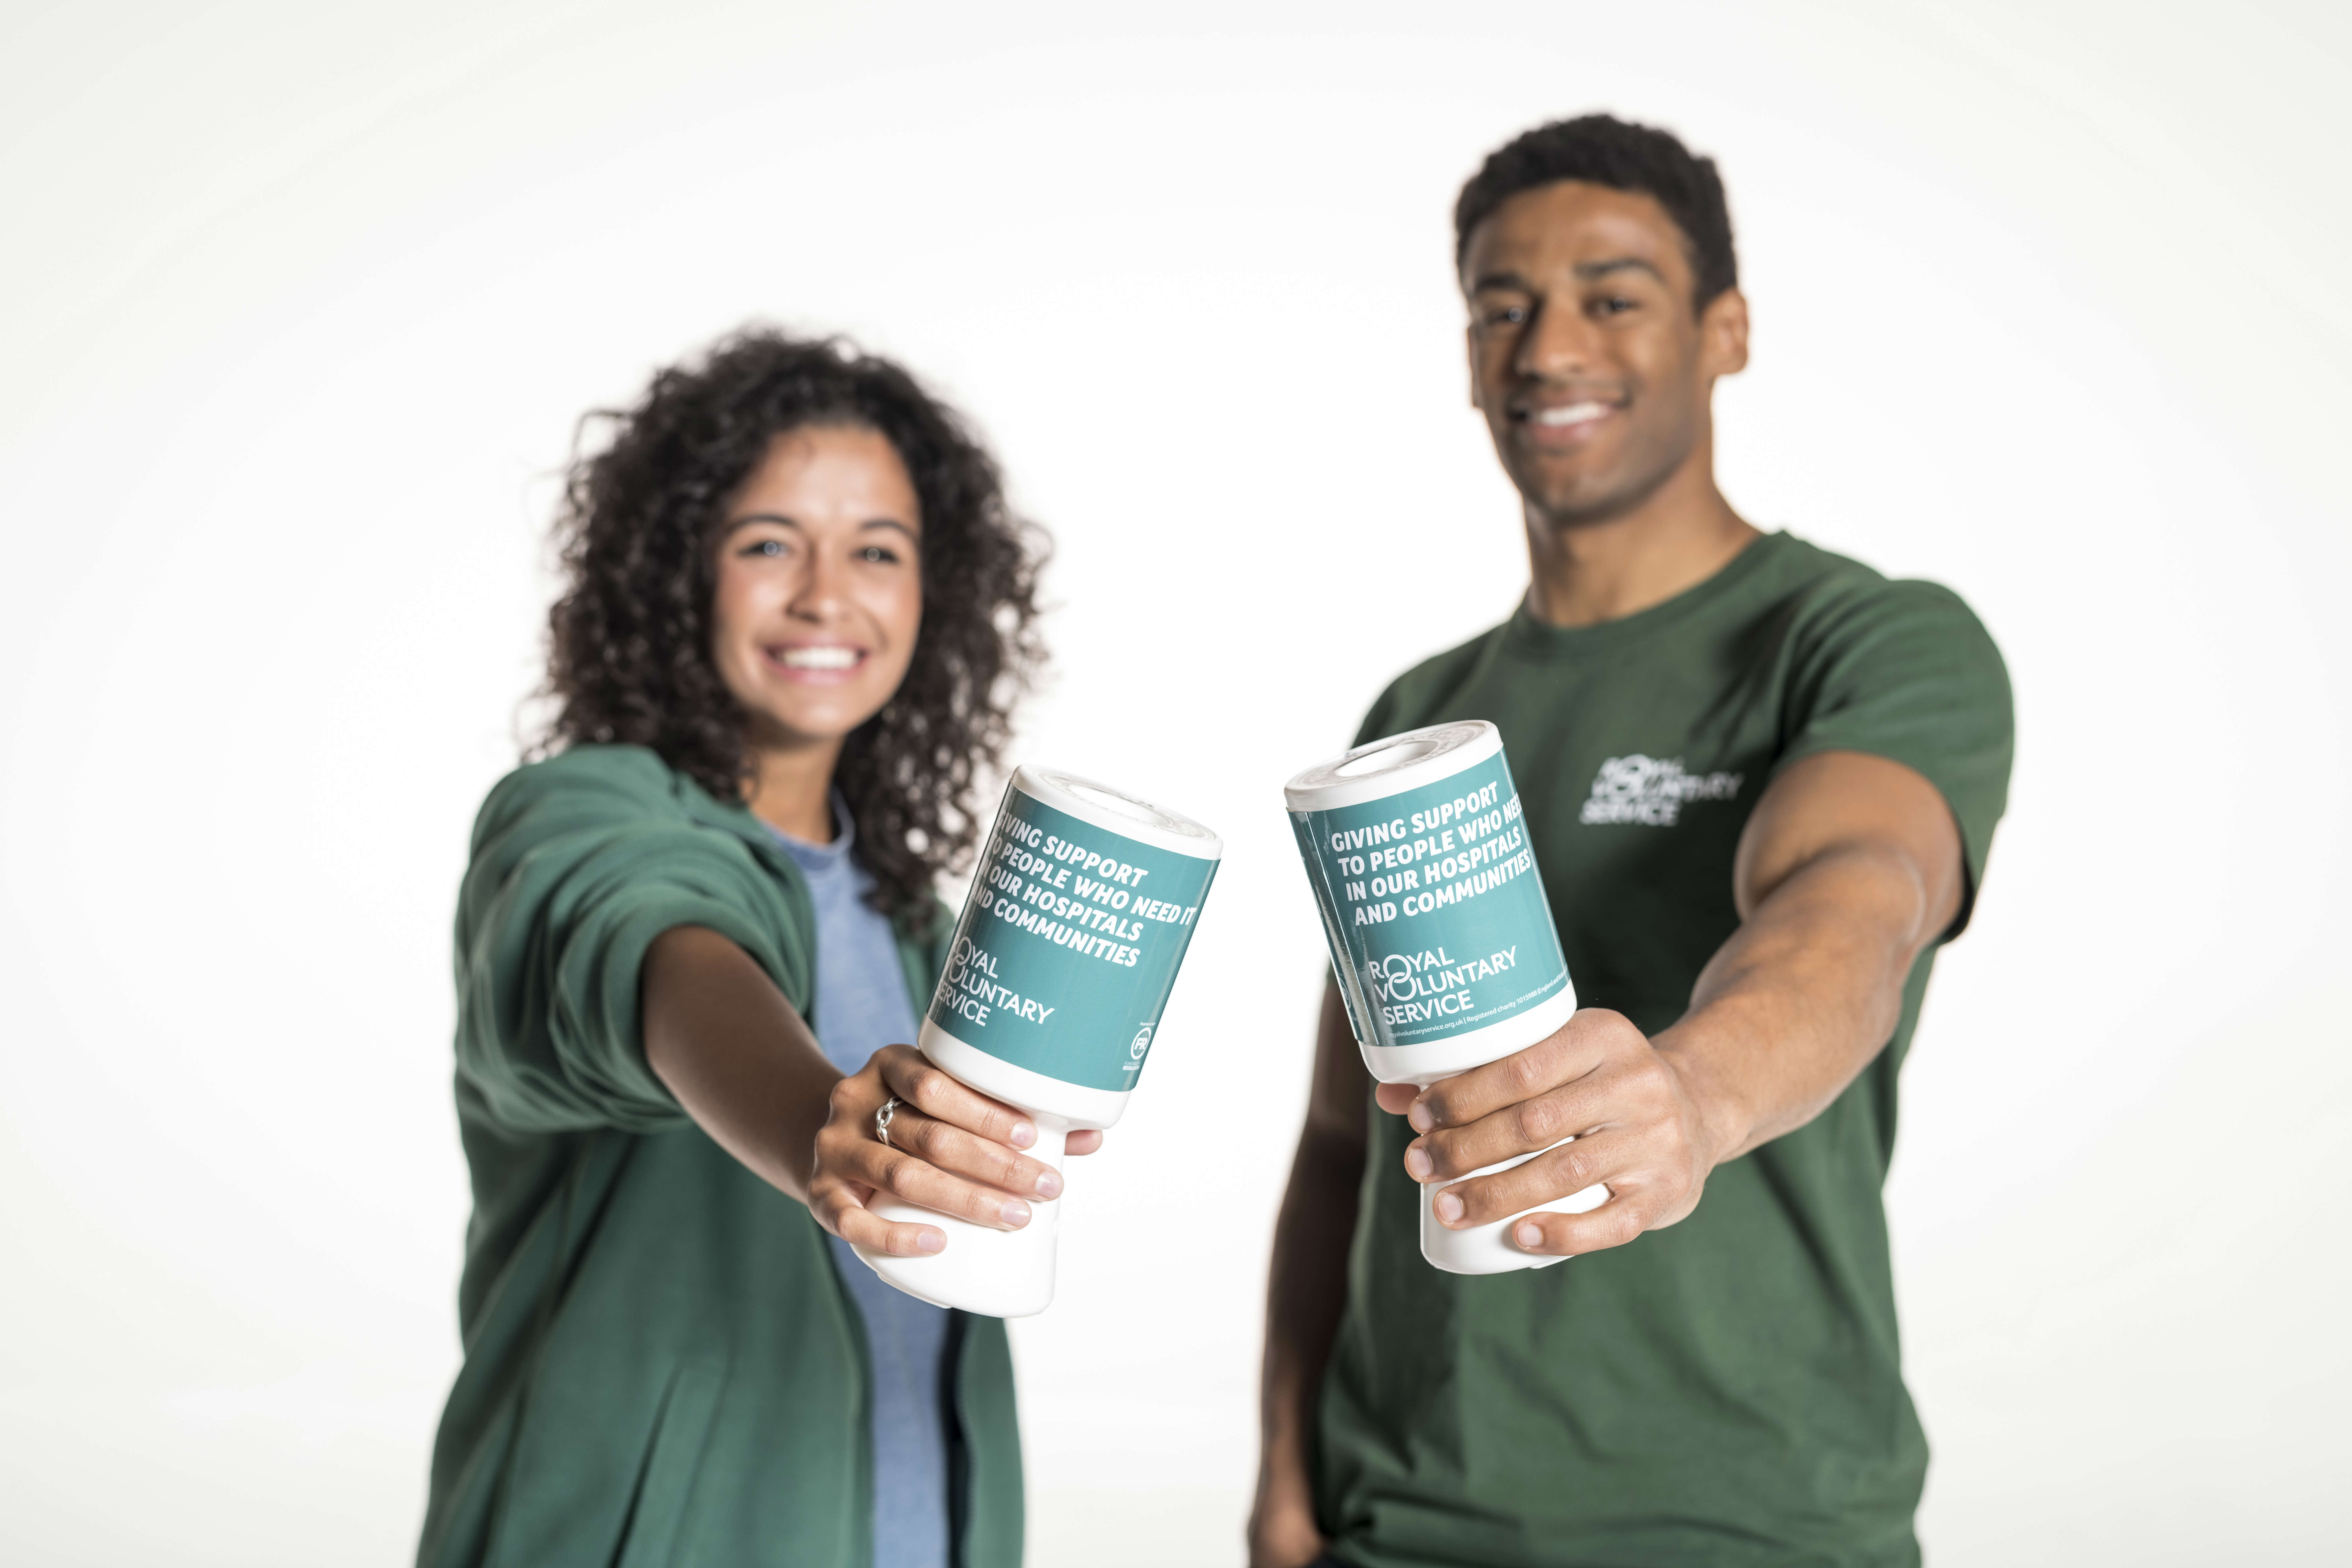 Donate to Royal Voluntary Service 